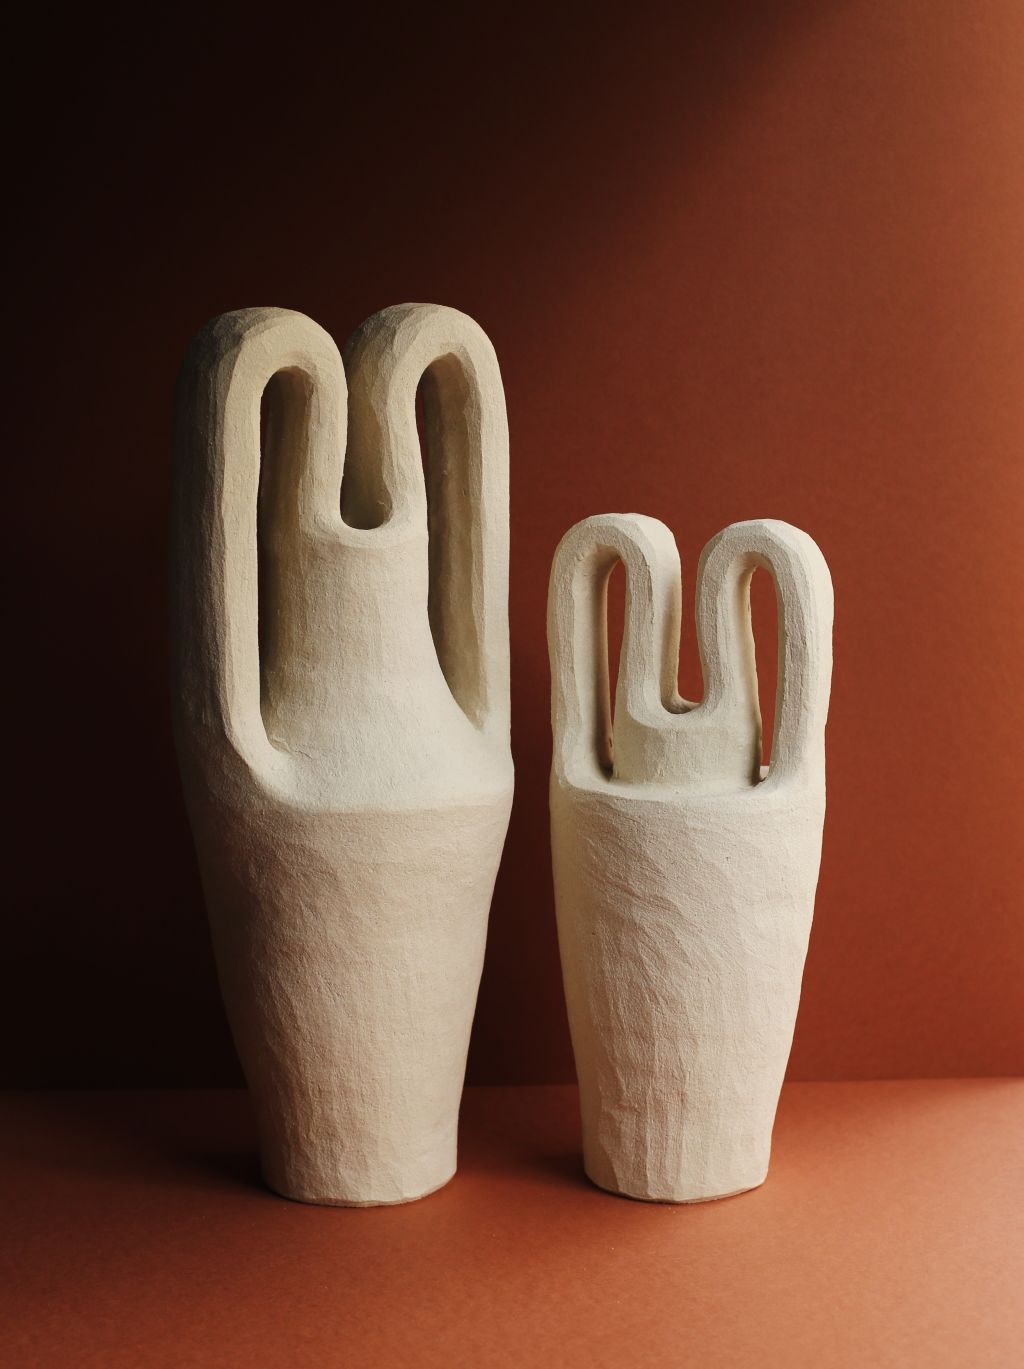 Bendrups creates sculptural forms influenced by Cycladic, Cypriot and Etruscan cultures. Photo: Supplied